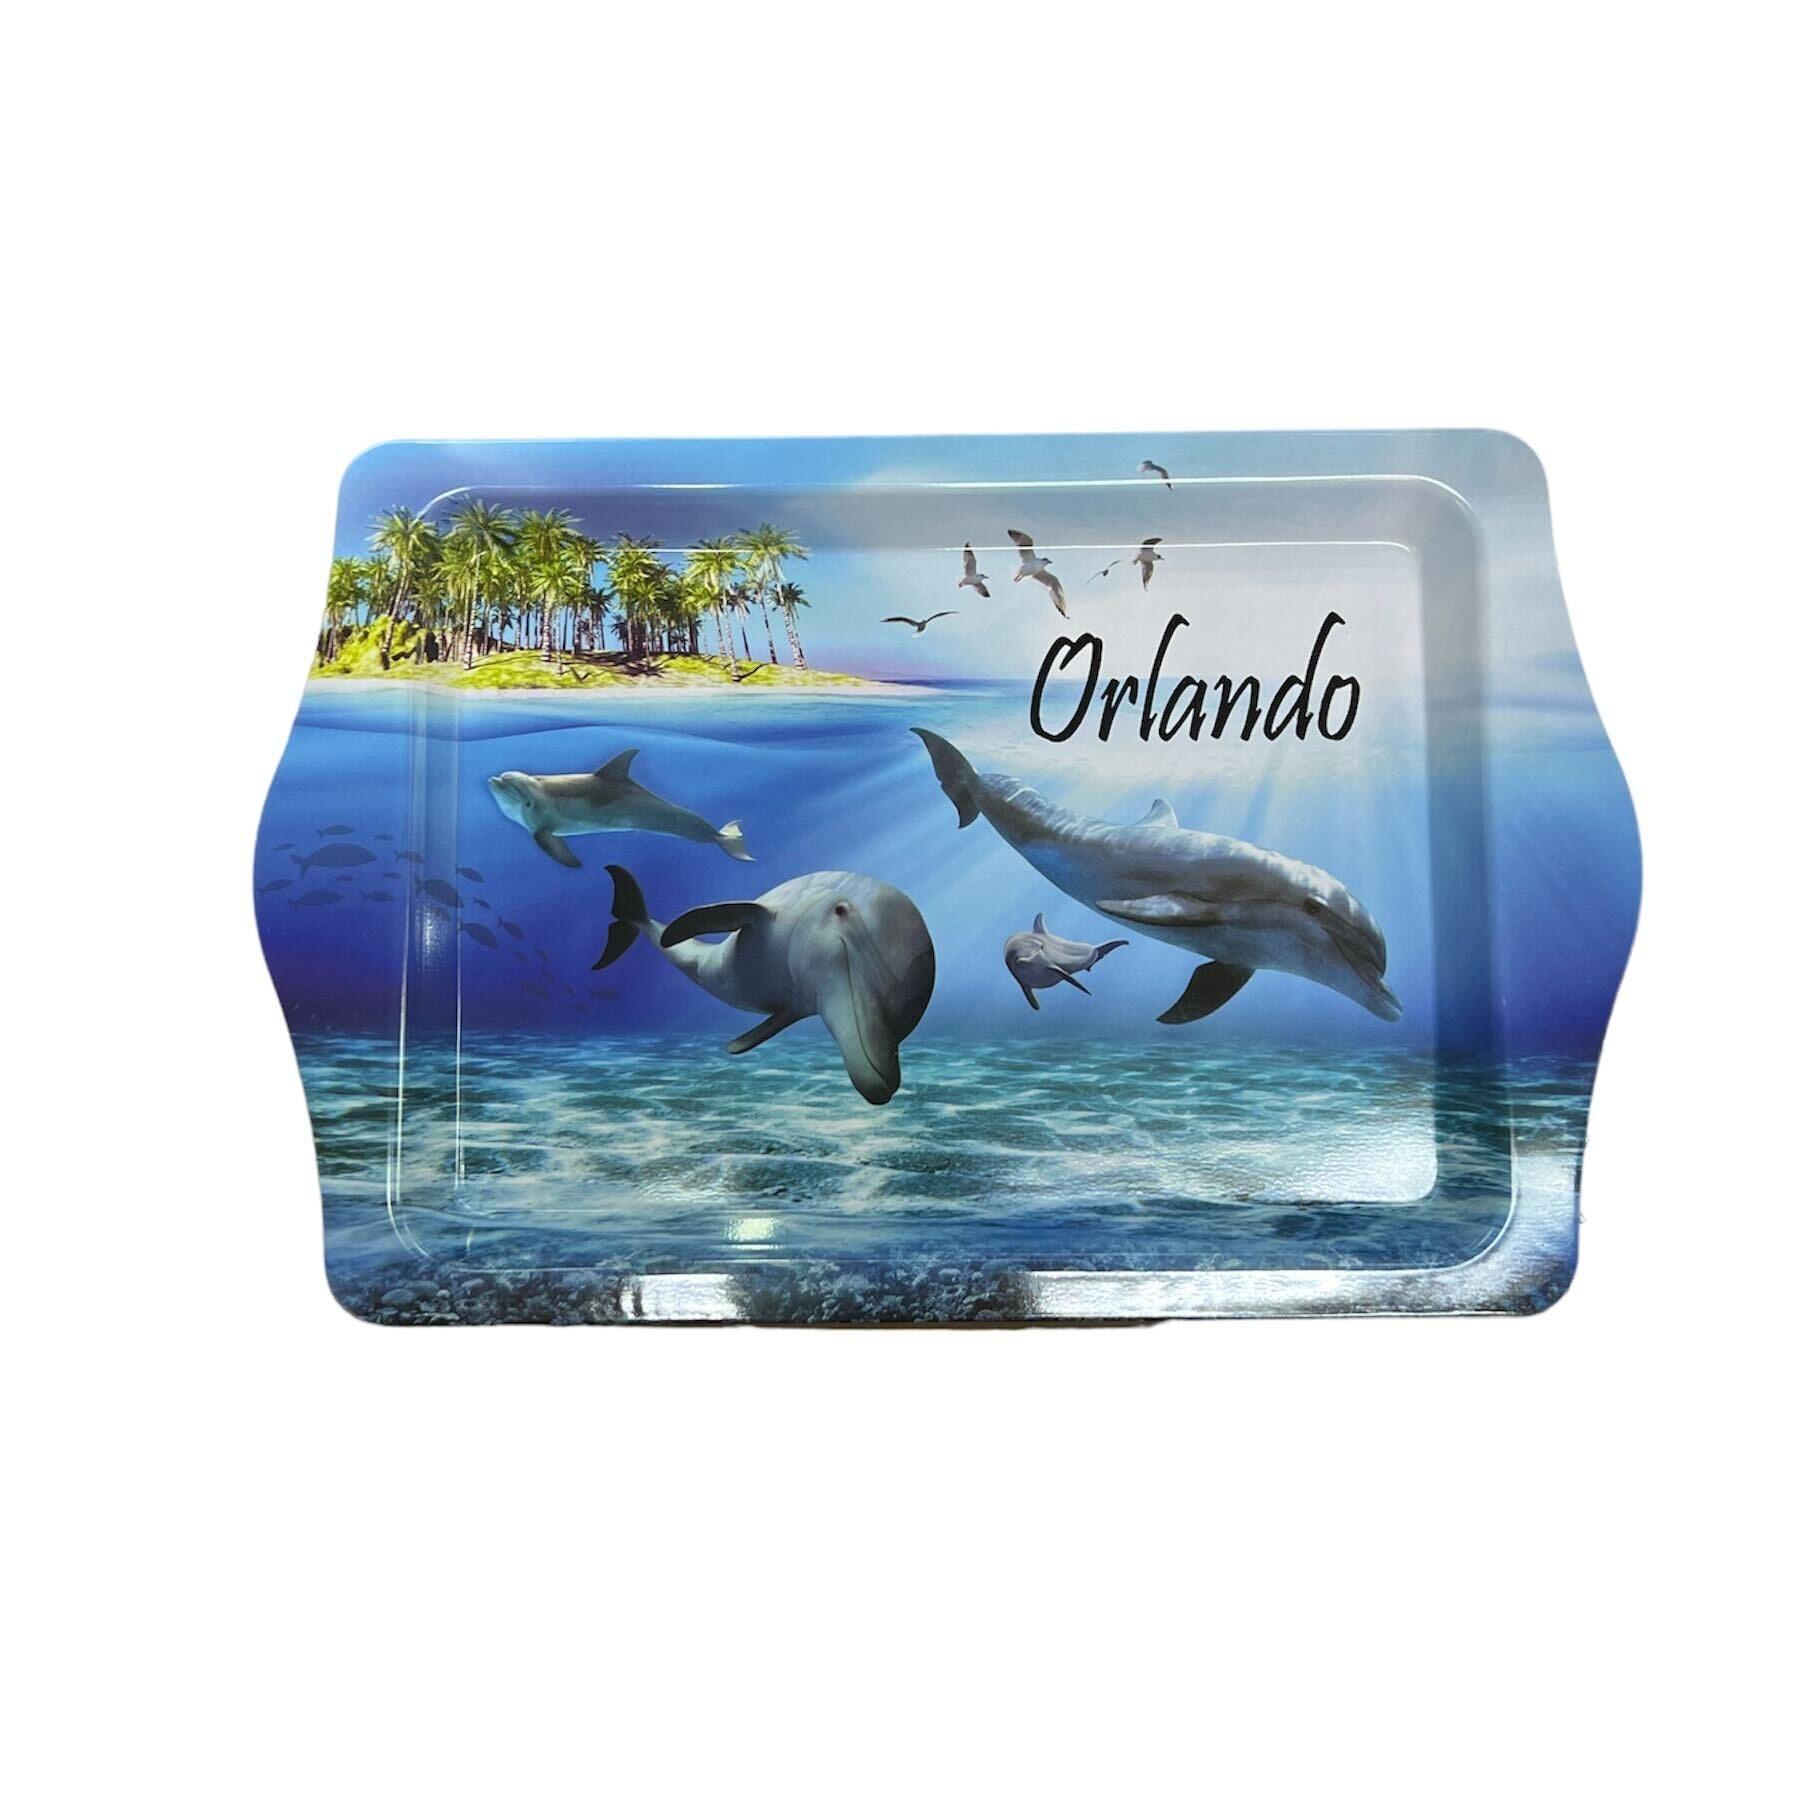 Orlando Dolphins in the Sea Metal Tray